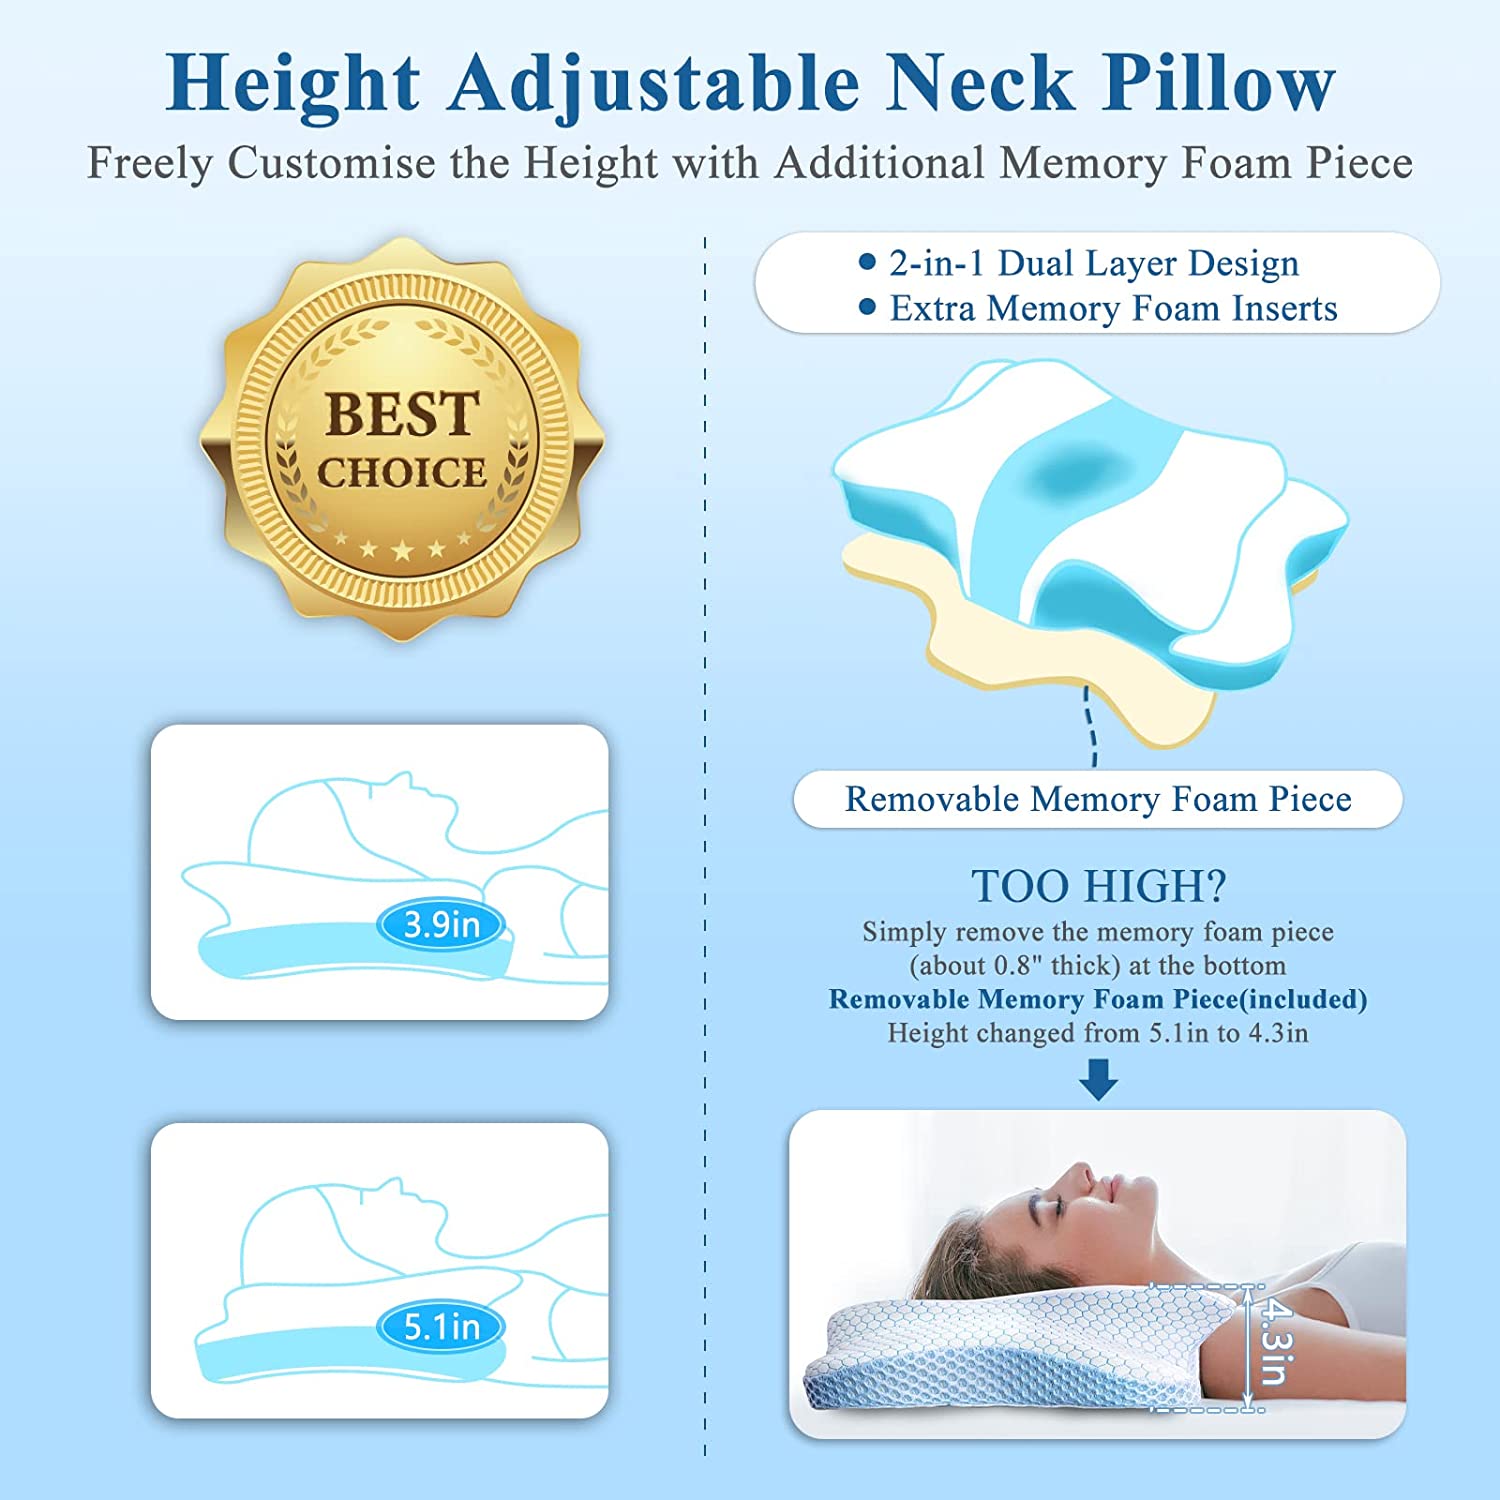 DIKI Cervical Memory Foam Pillow - Adjustable Contour Pillow for Neck Pain Relief, Orthopedic Neck Support Sleeping Pillow for Side Back Stomach Sleeper, Ergonomic Bed Pillow for Neck Pain, Blue White